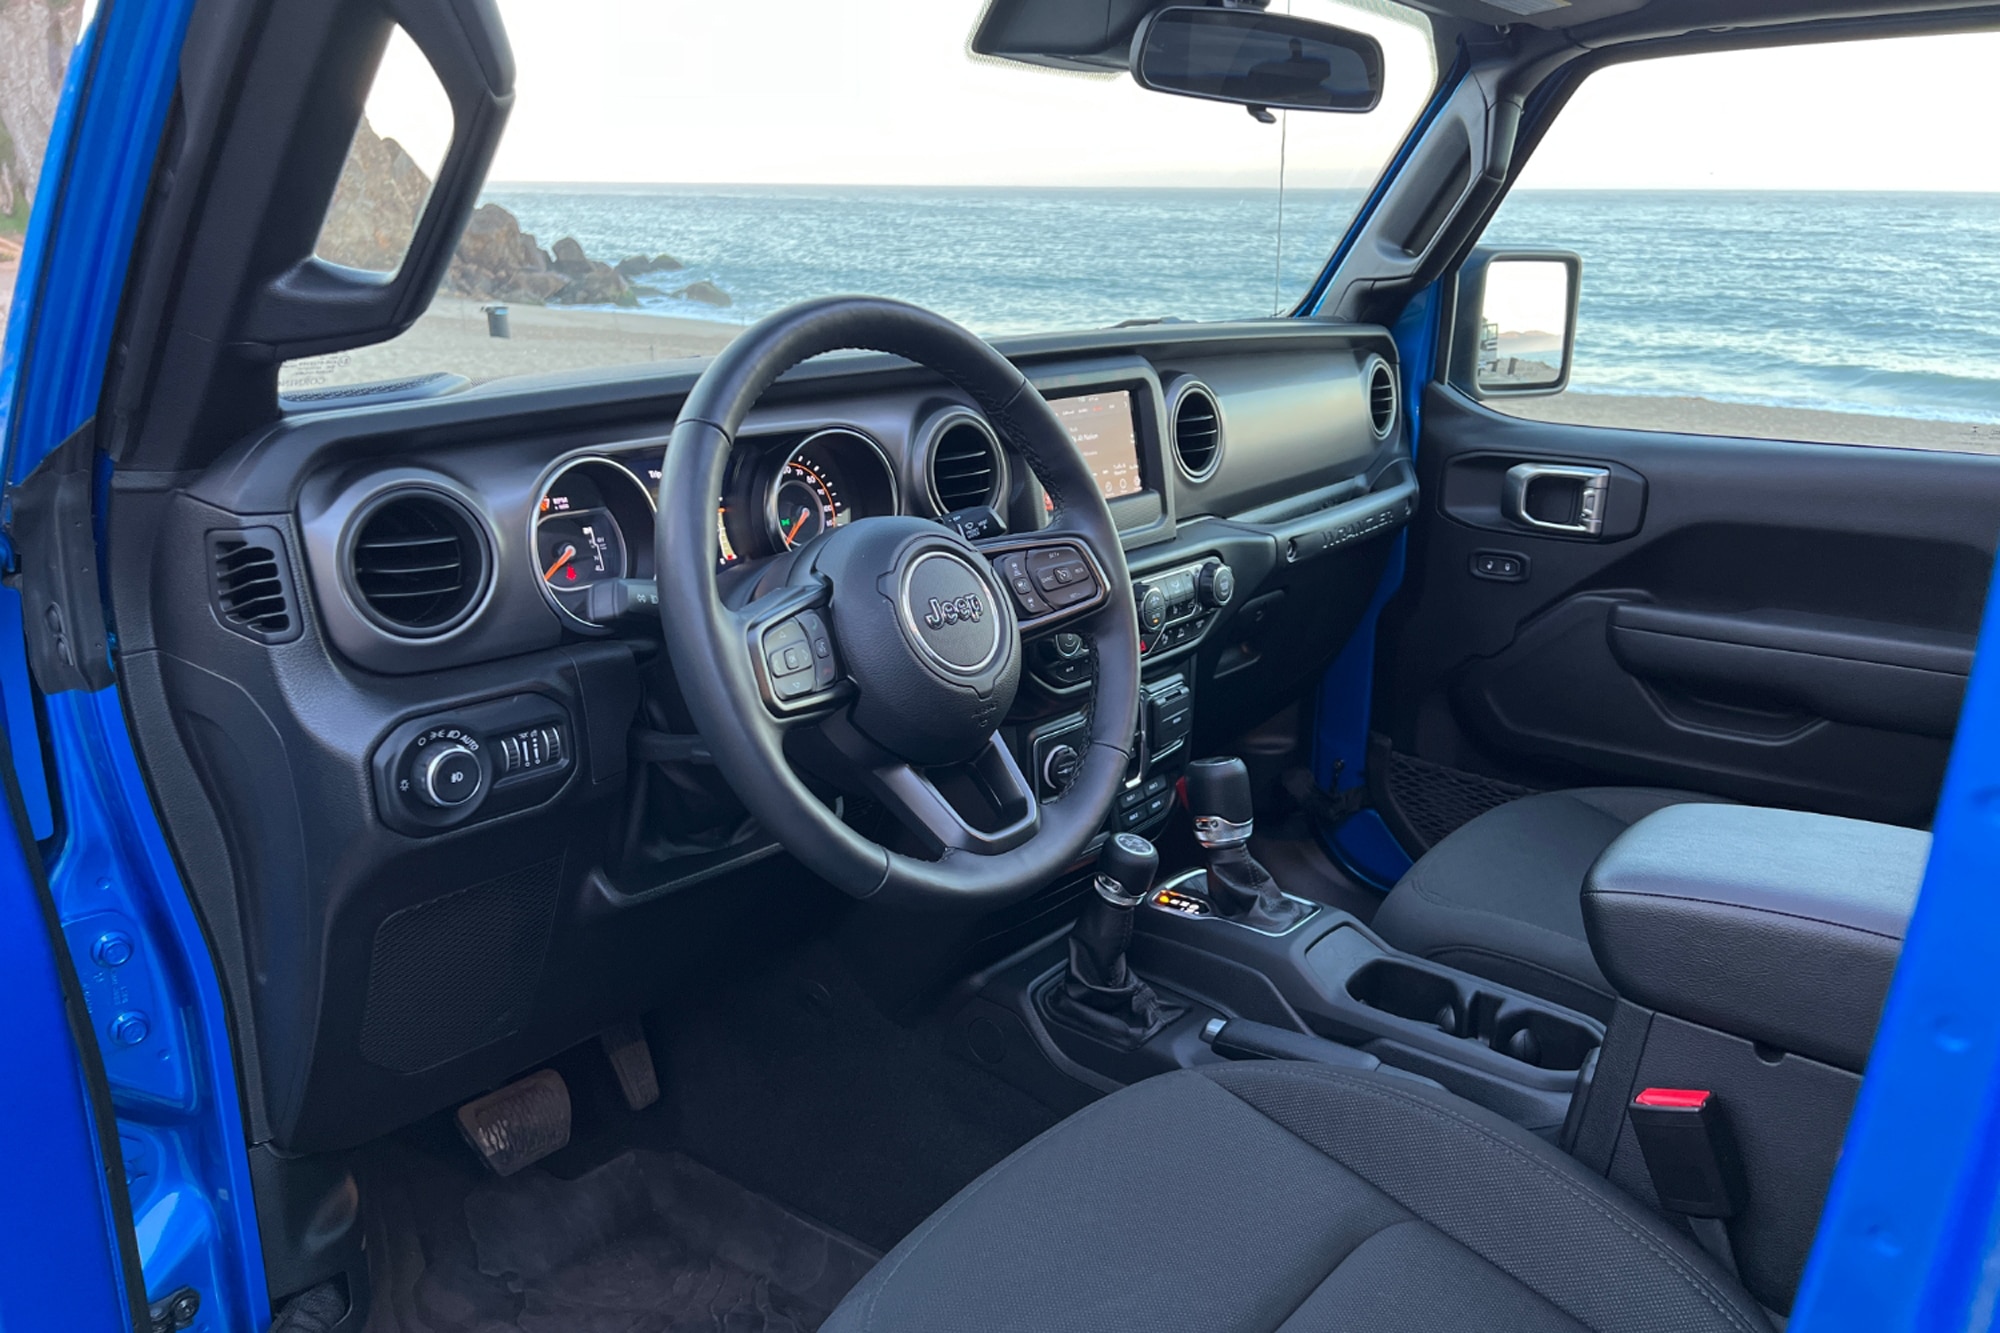 2022 Jeep Wrangler High Tide interior dashboard with view of sand and ocean